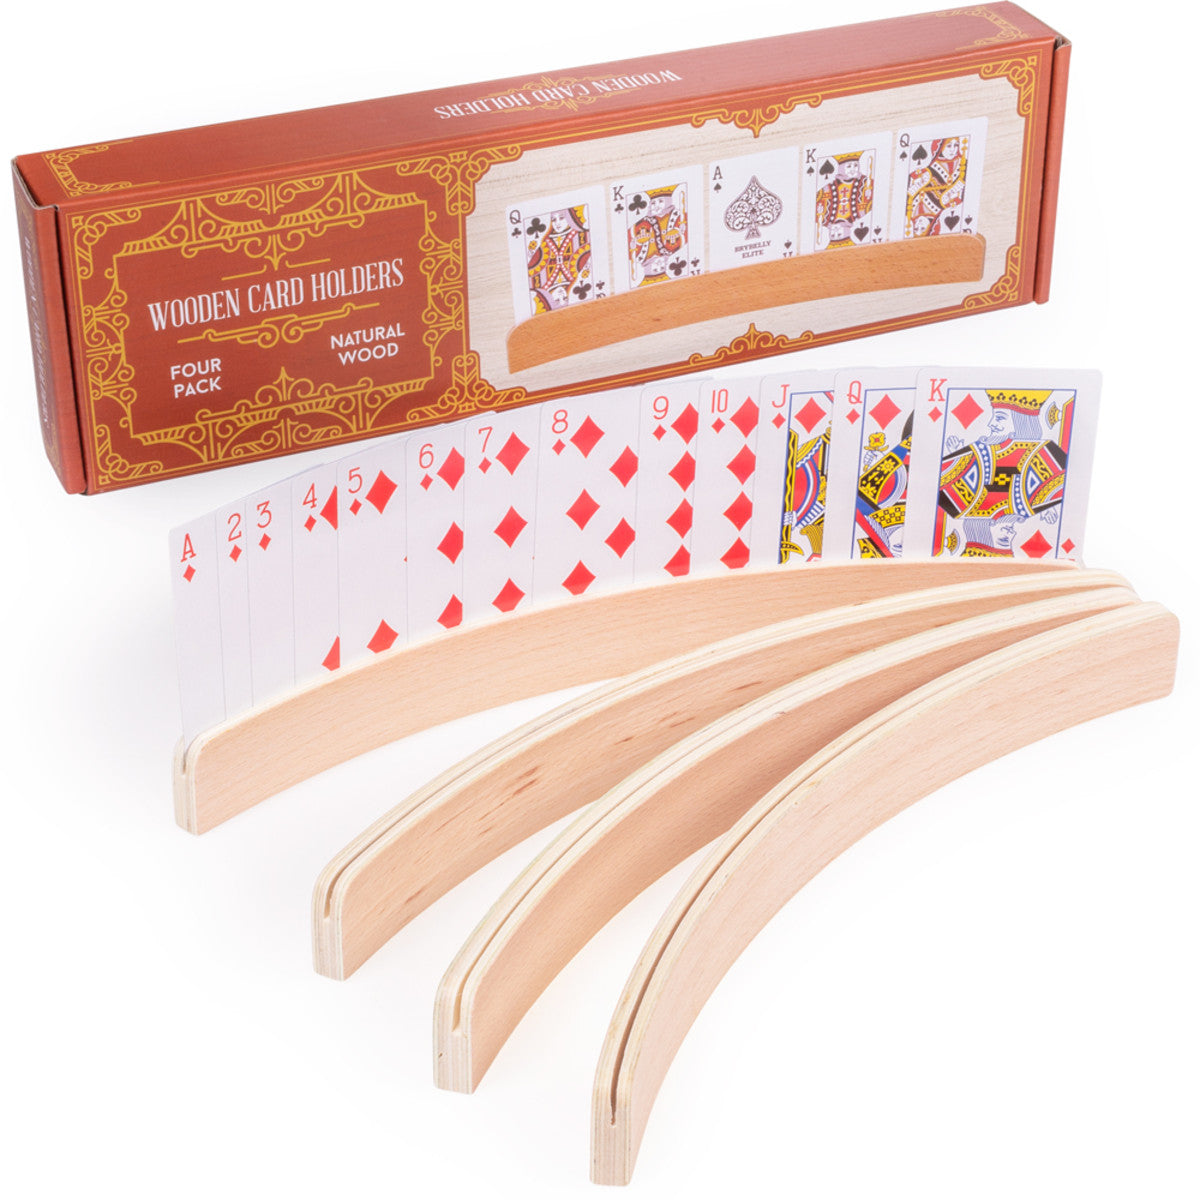 Wooden Card Holders, 4-Pack - Classic - Game On